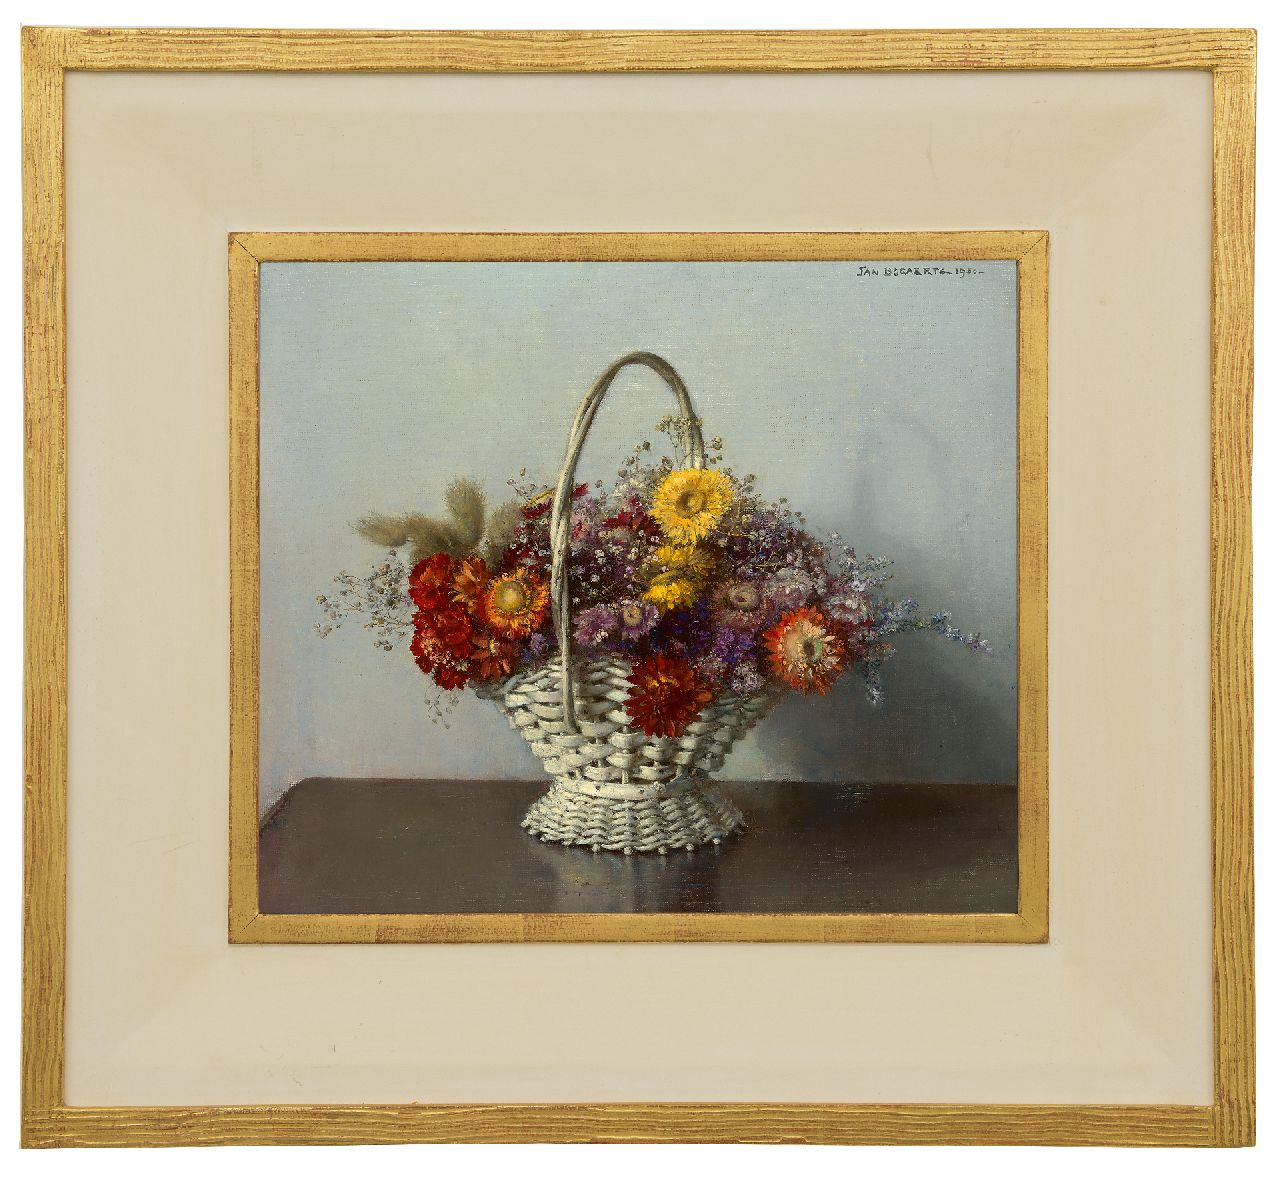 Bogaerts J.J.M.  | Johannes Jacobus Maria 'Jan' Bogaerts | Paintings offered for sale | Bouquet of dried flowers in a basket, oil on canvas 35.0 x 40.0 cm, signed l.r. and dated 1950